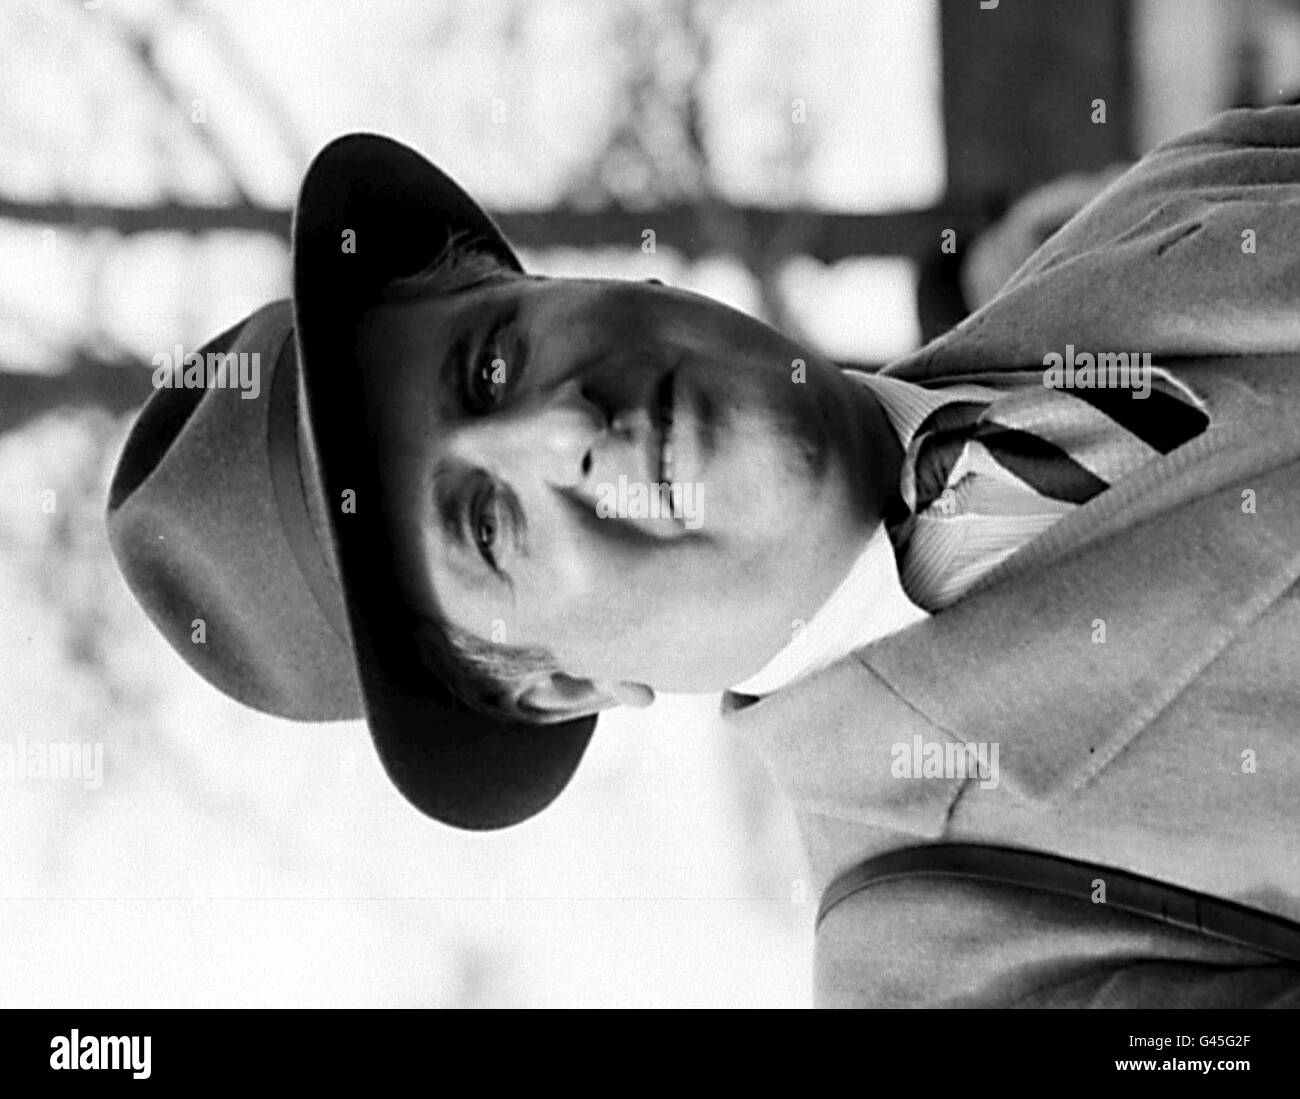 Library filer ref 62217-1, dated 8.3.57, of race horse trainer Captain Neville Crump. Crump, who began training in 1937 after riding as an amateur, died last night at the age of 86. PA. SEE PA STORY RACING Crump.**AVAILABLE B/W ONLY** Stock Photo